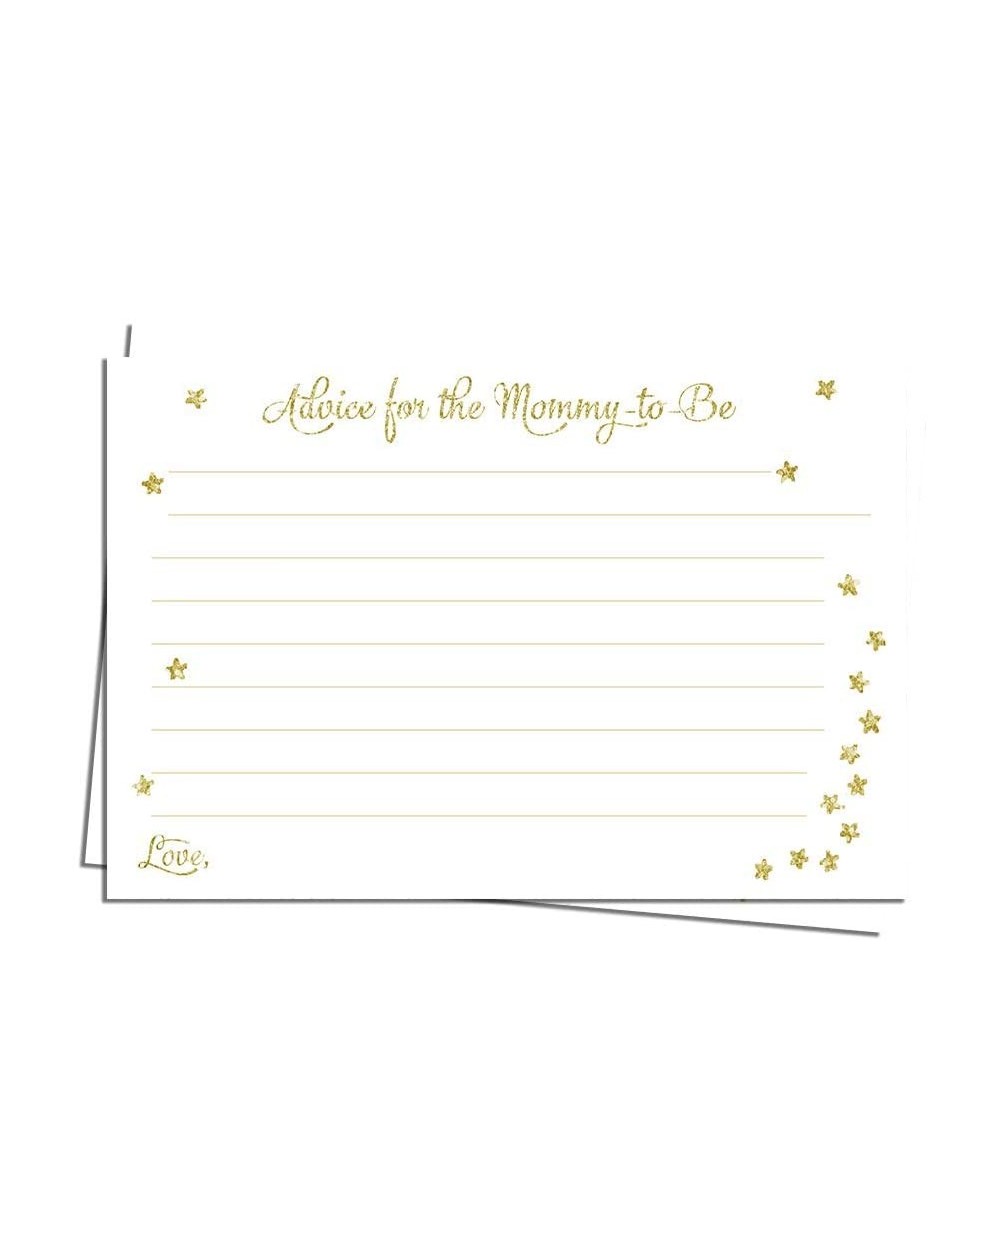 Invitations Twinkle Little Star Baby Shower Advice Cards for Mommy to Be White Glitter Gold Gender Neutral Boy or Girl Activi...